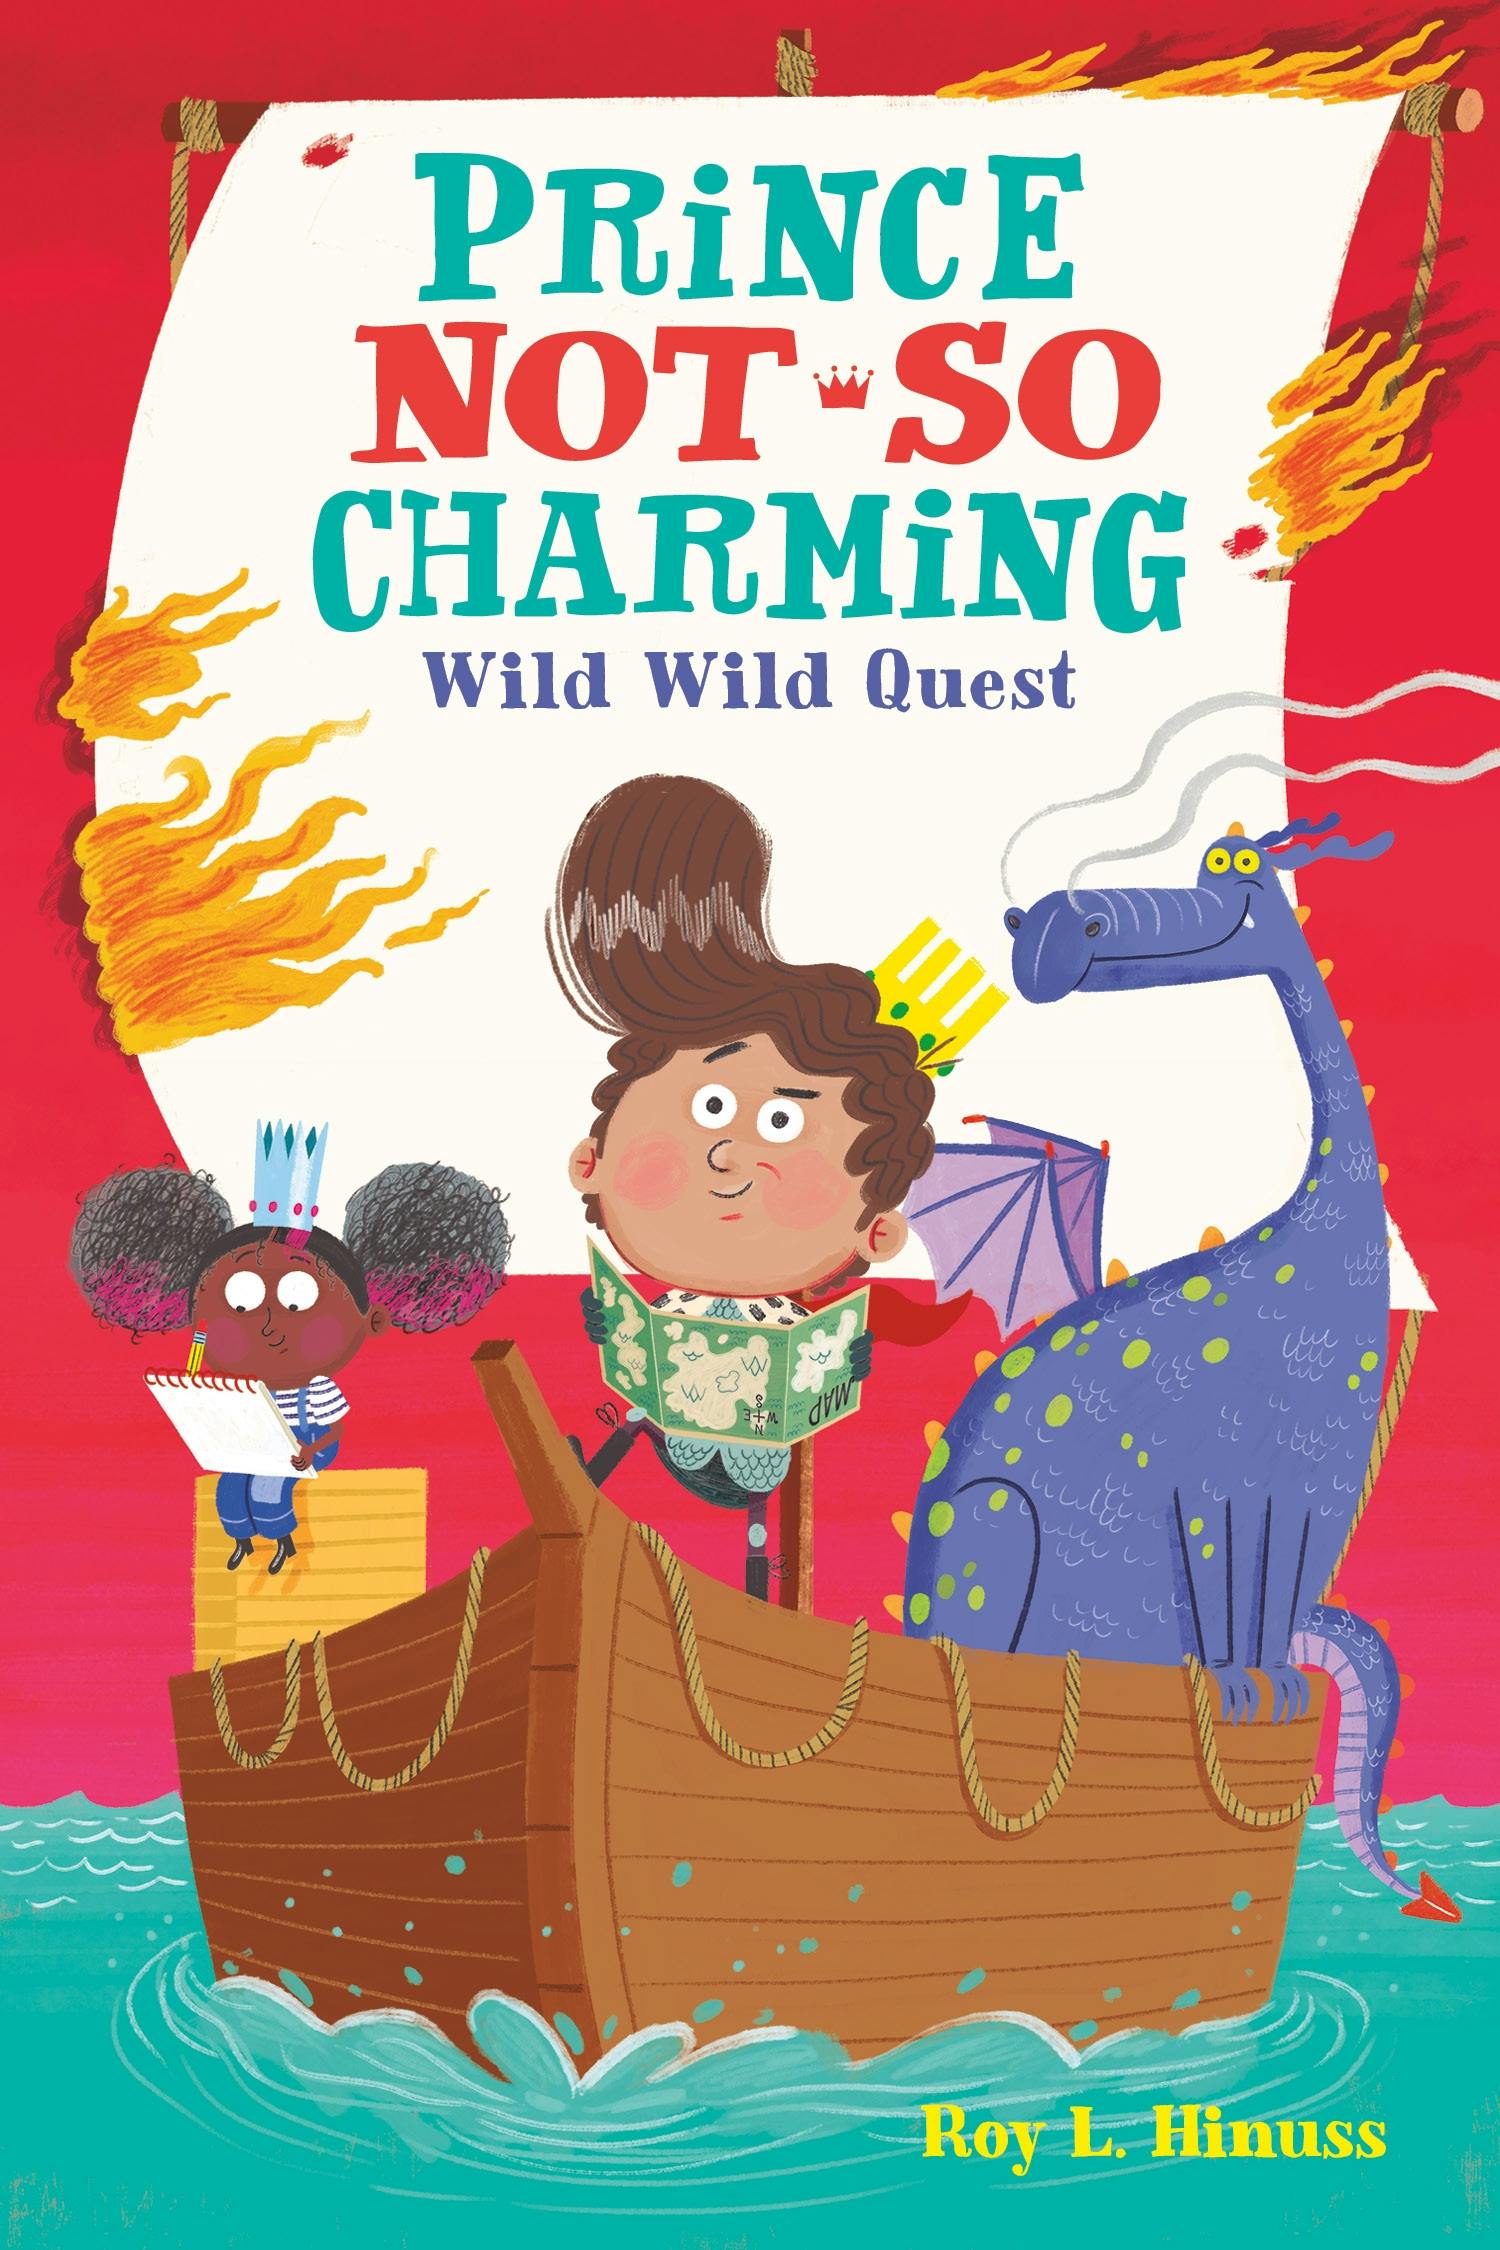 Prince Not-So Charming: Wild Wild Quest